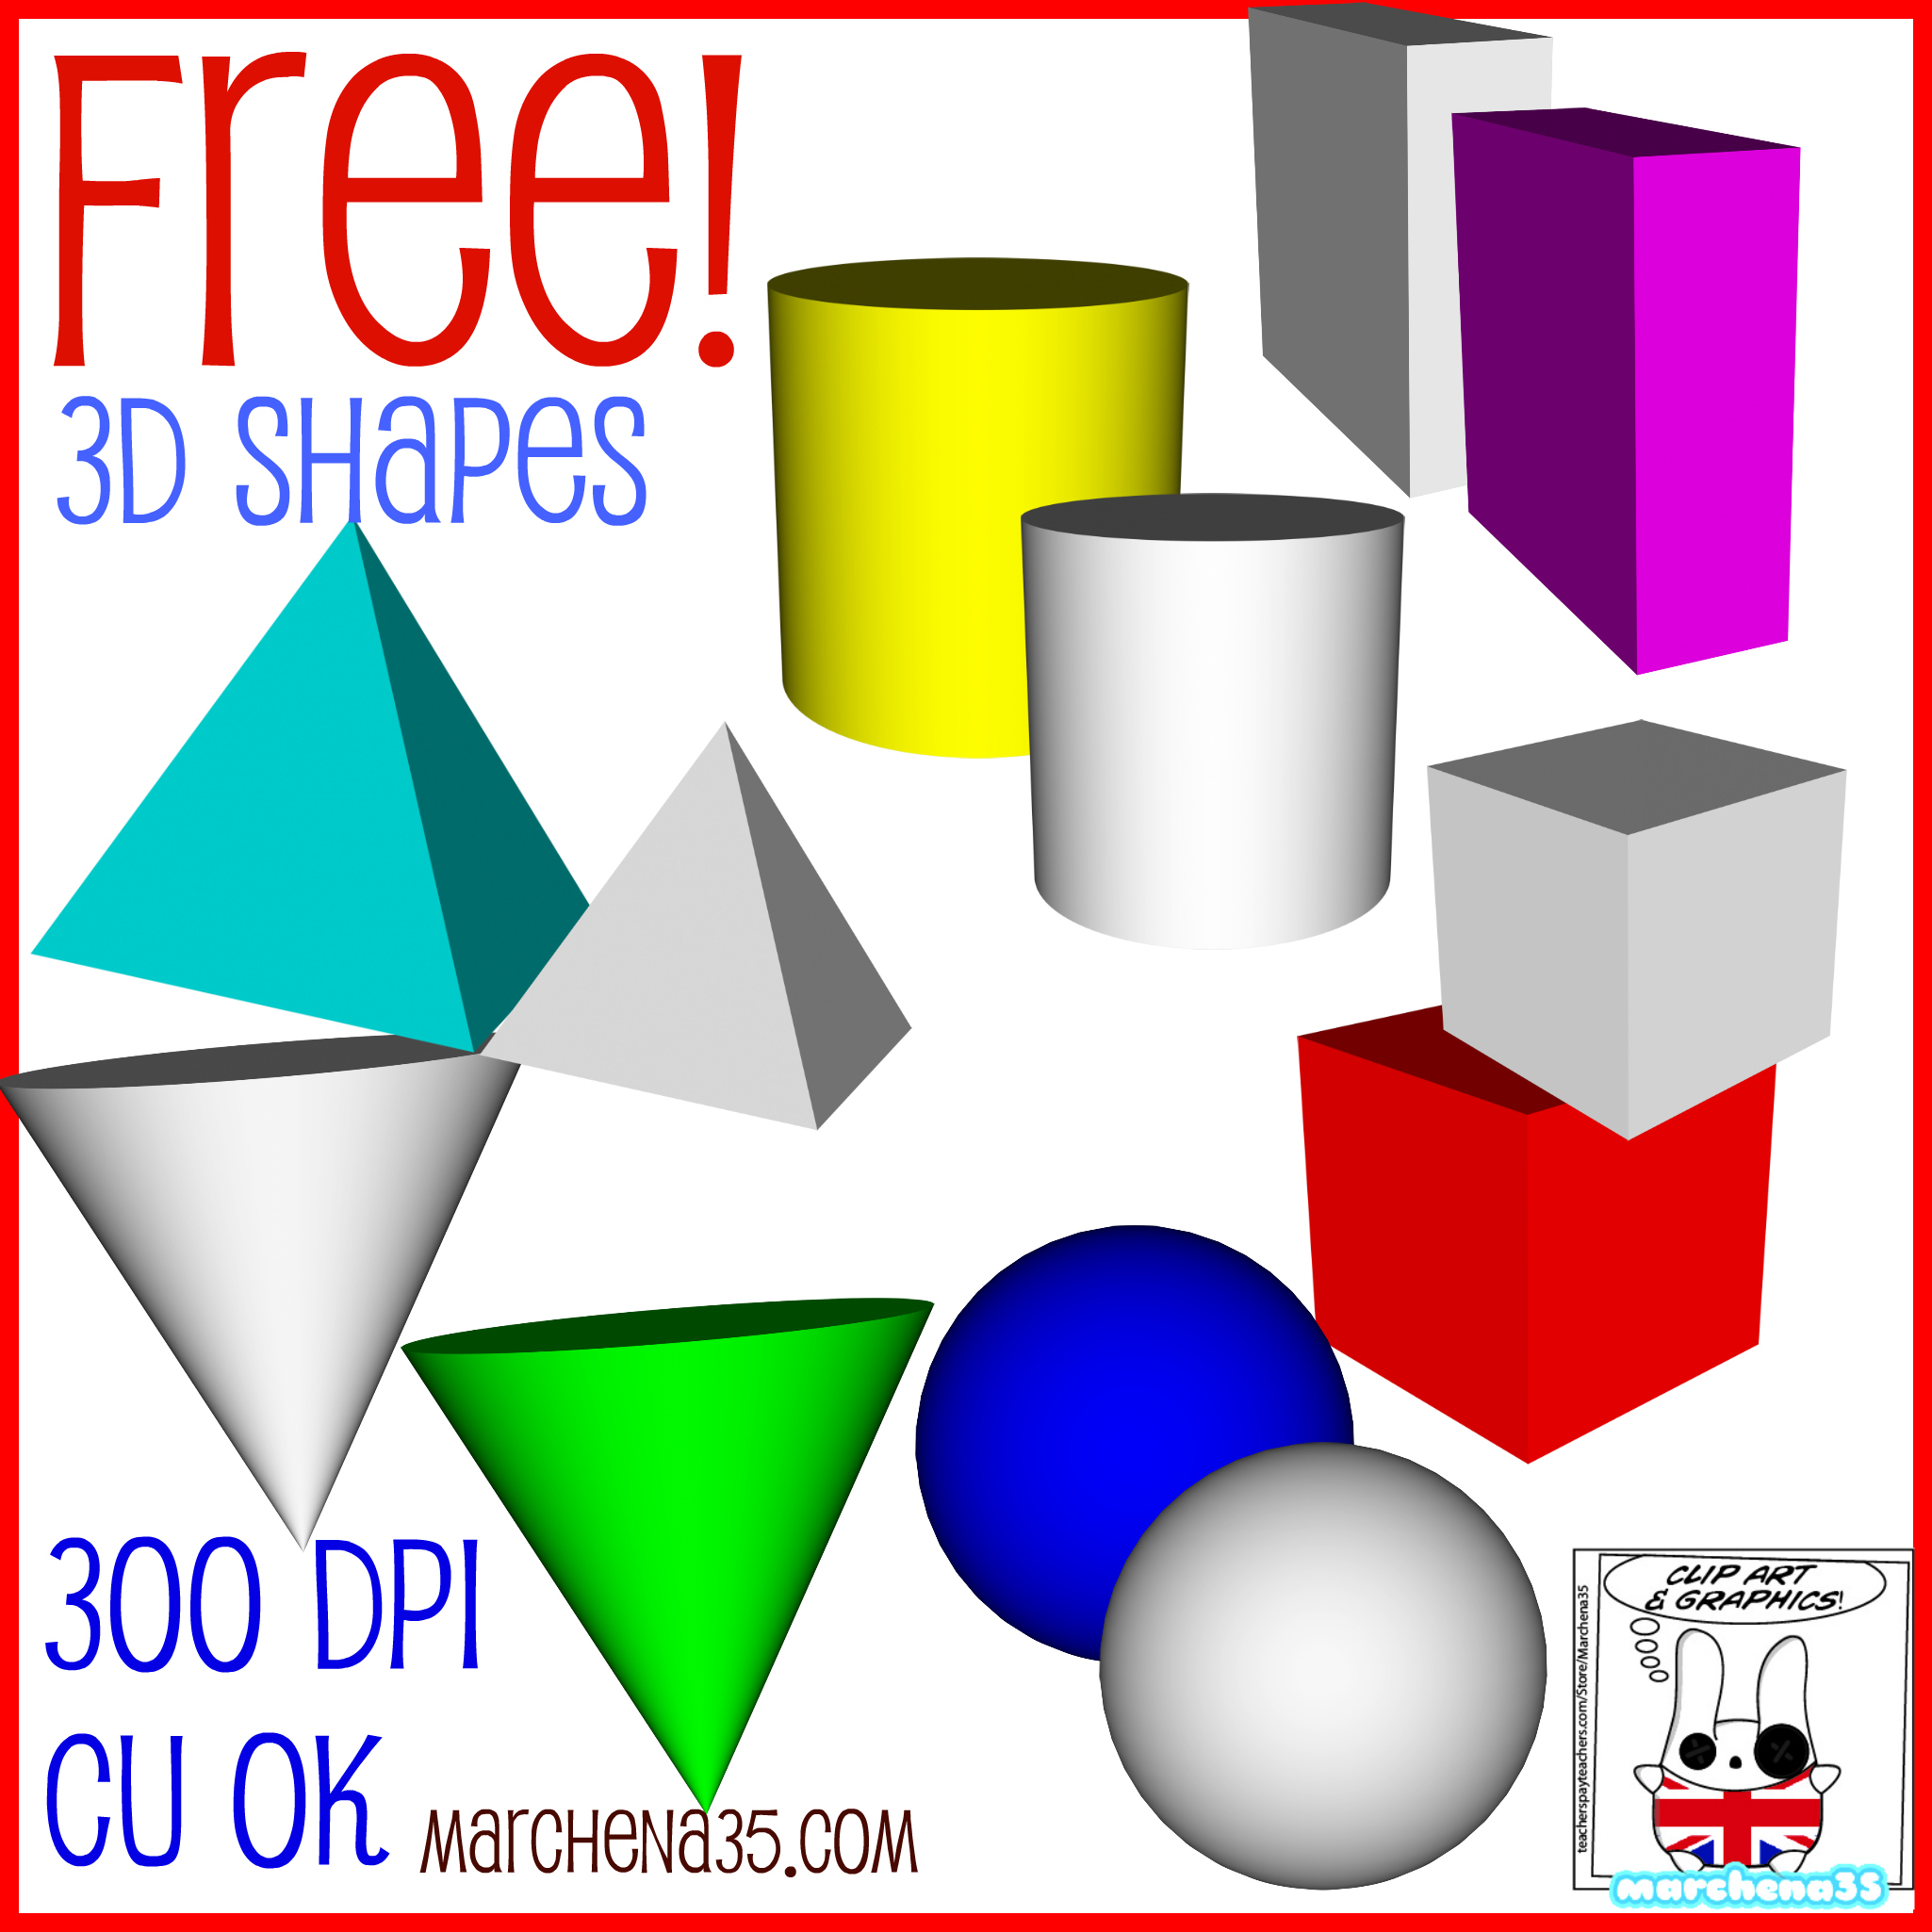 Creator Galleries Related 3d Shapes Clip Art Black And White 3d